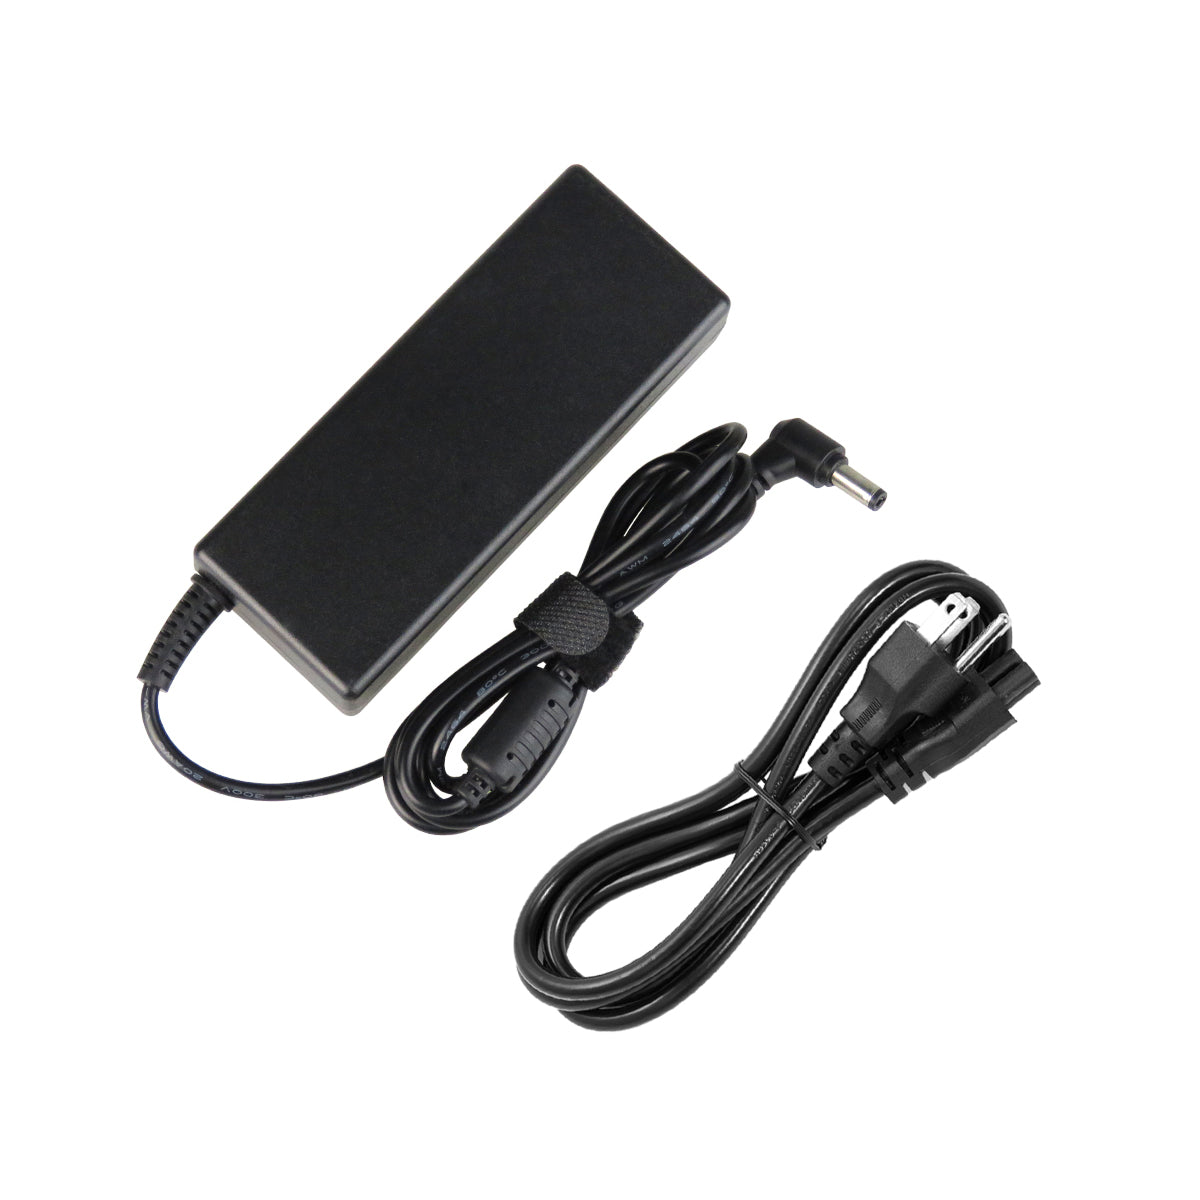 AC Adapter Charger for ASUS K45VG Notebook.